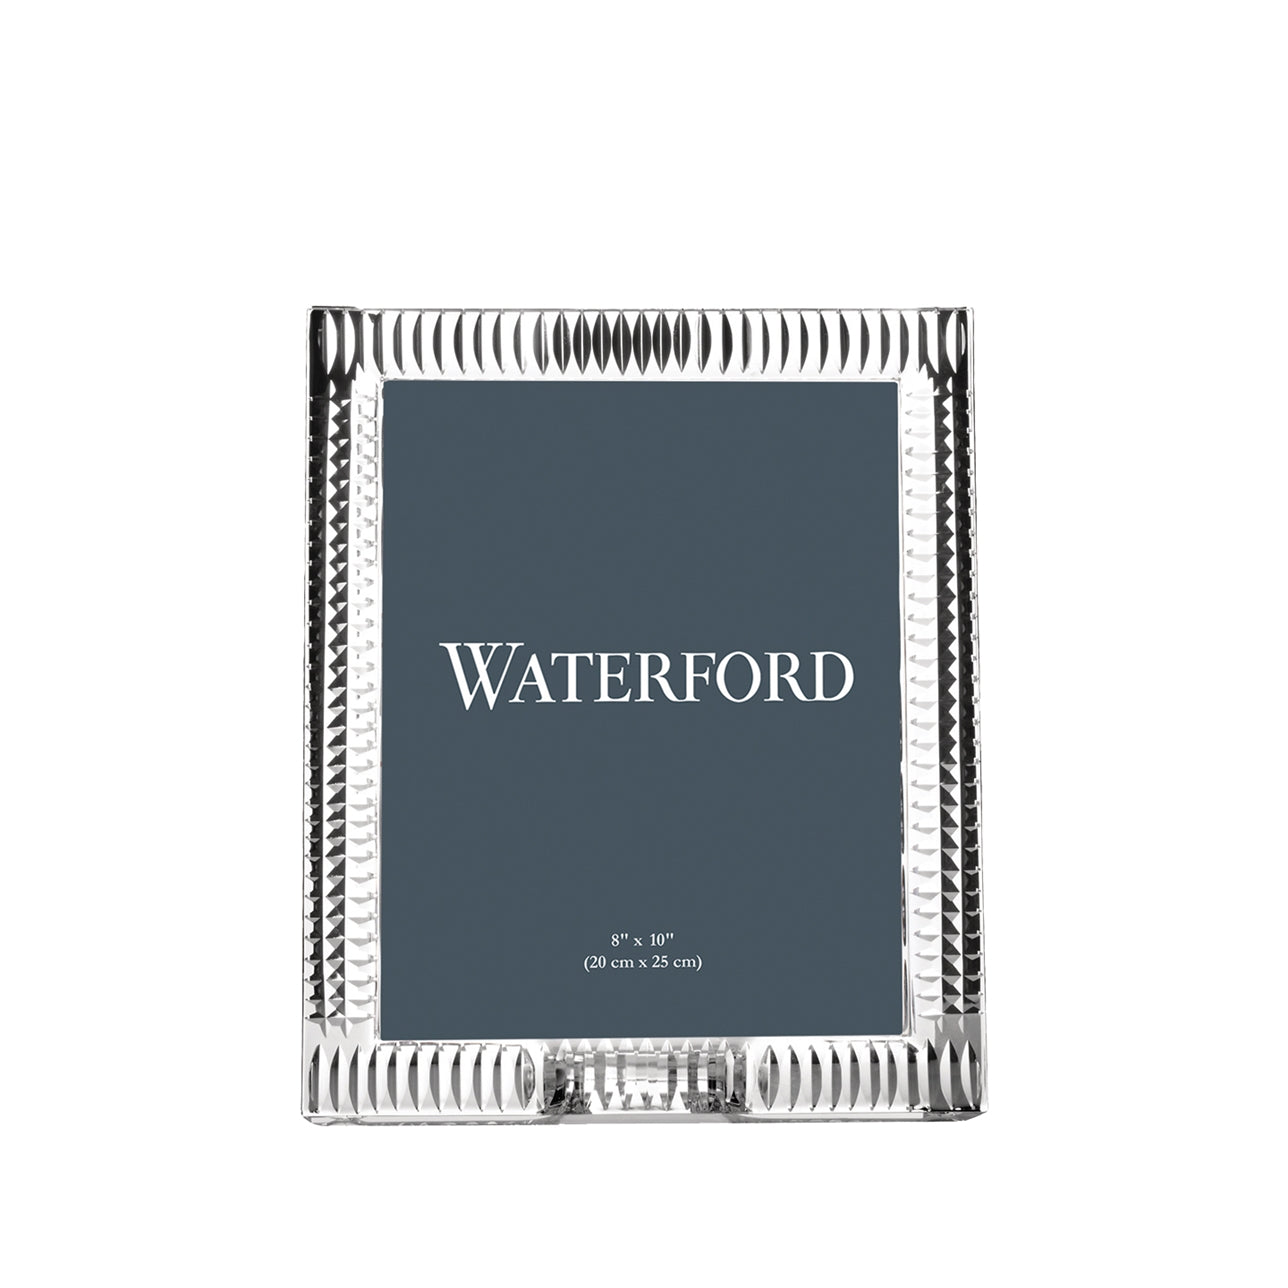 Waterford Crystal Lismore Diamond 8 x 10in Frame  The Lismore Diamond pattern is a strikingly modern reinvention of the Waterford classic : characterized by intricate diamond cuts rendered in radiant fine crystal. Enhance your treasured memories with the Lismore Diamond 8x10 inch Frame, ideal for your favorite photographs. Perfect to display, a black velvet easel back stands it either vertically or horizontally on a table, desktop, mantel or shelf.